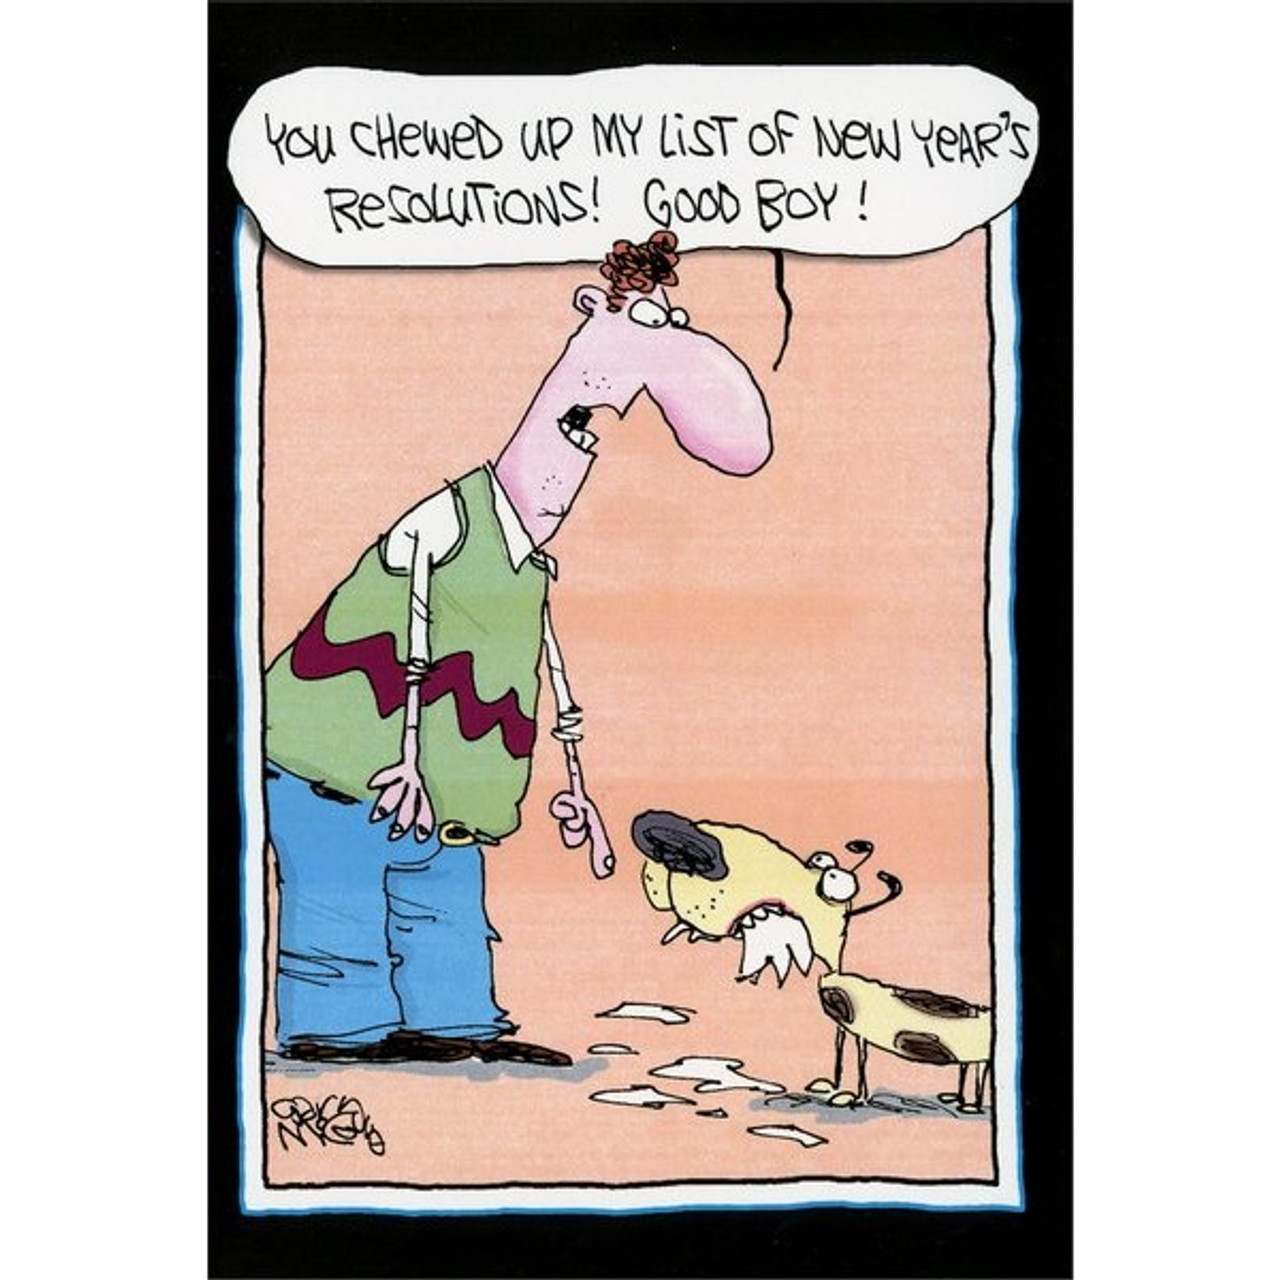 Chewed up Resolutions Funny / Humorous Dog New Year Card 